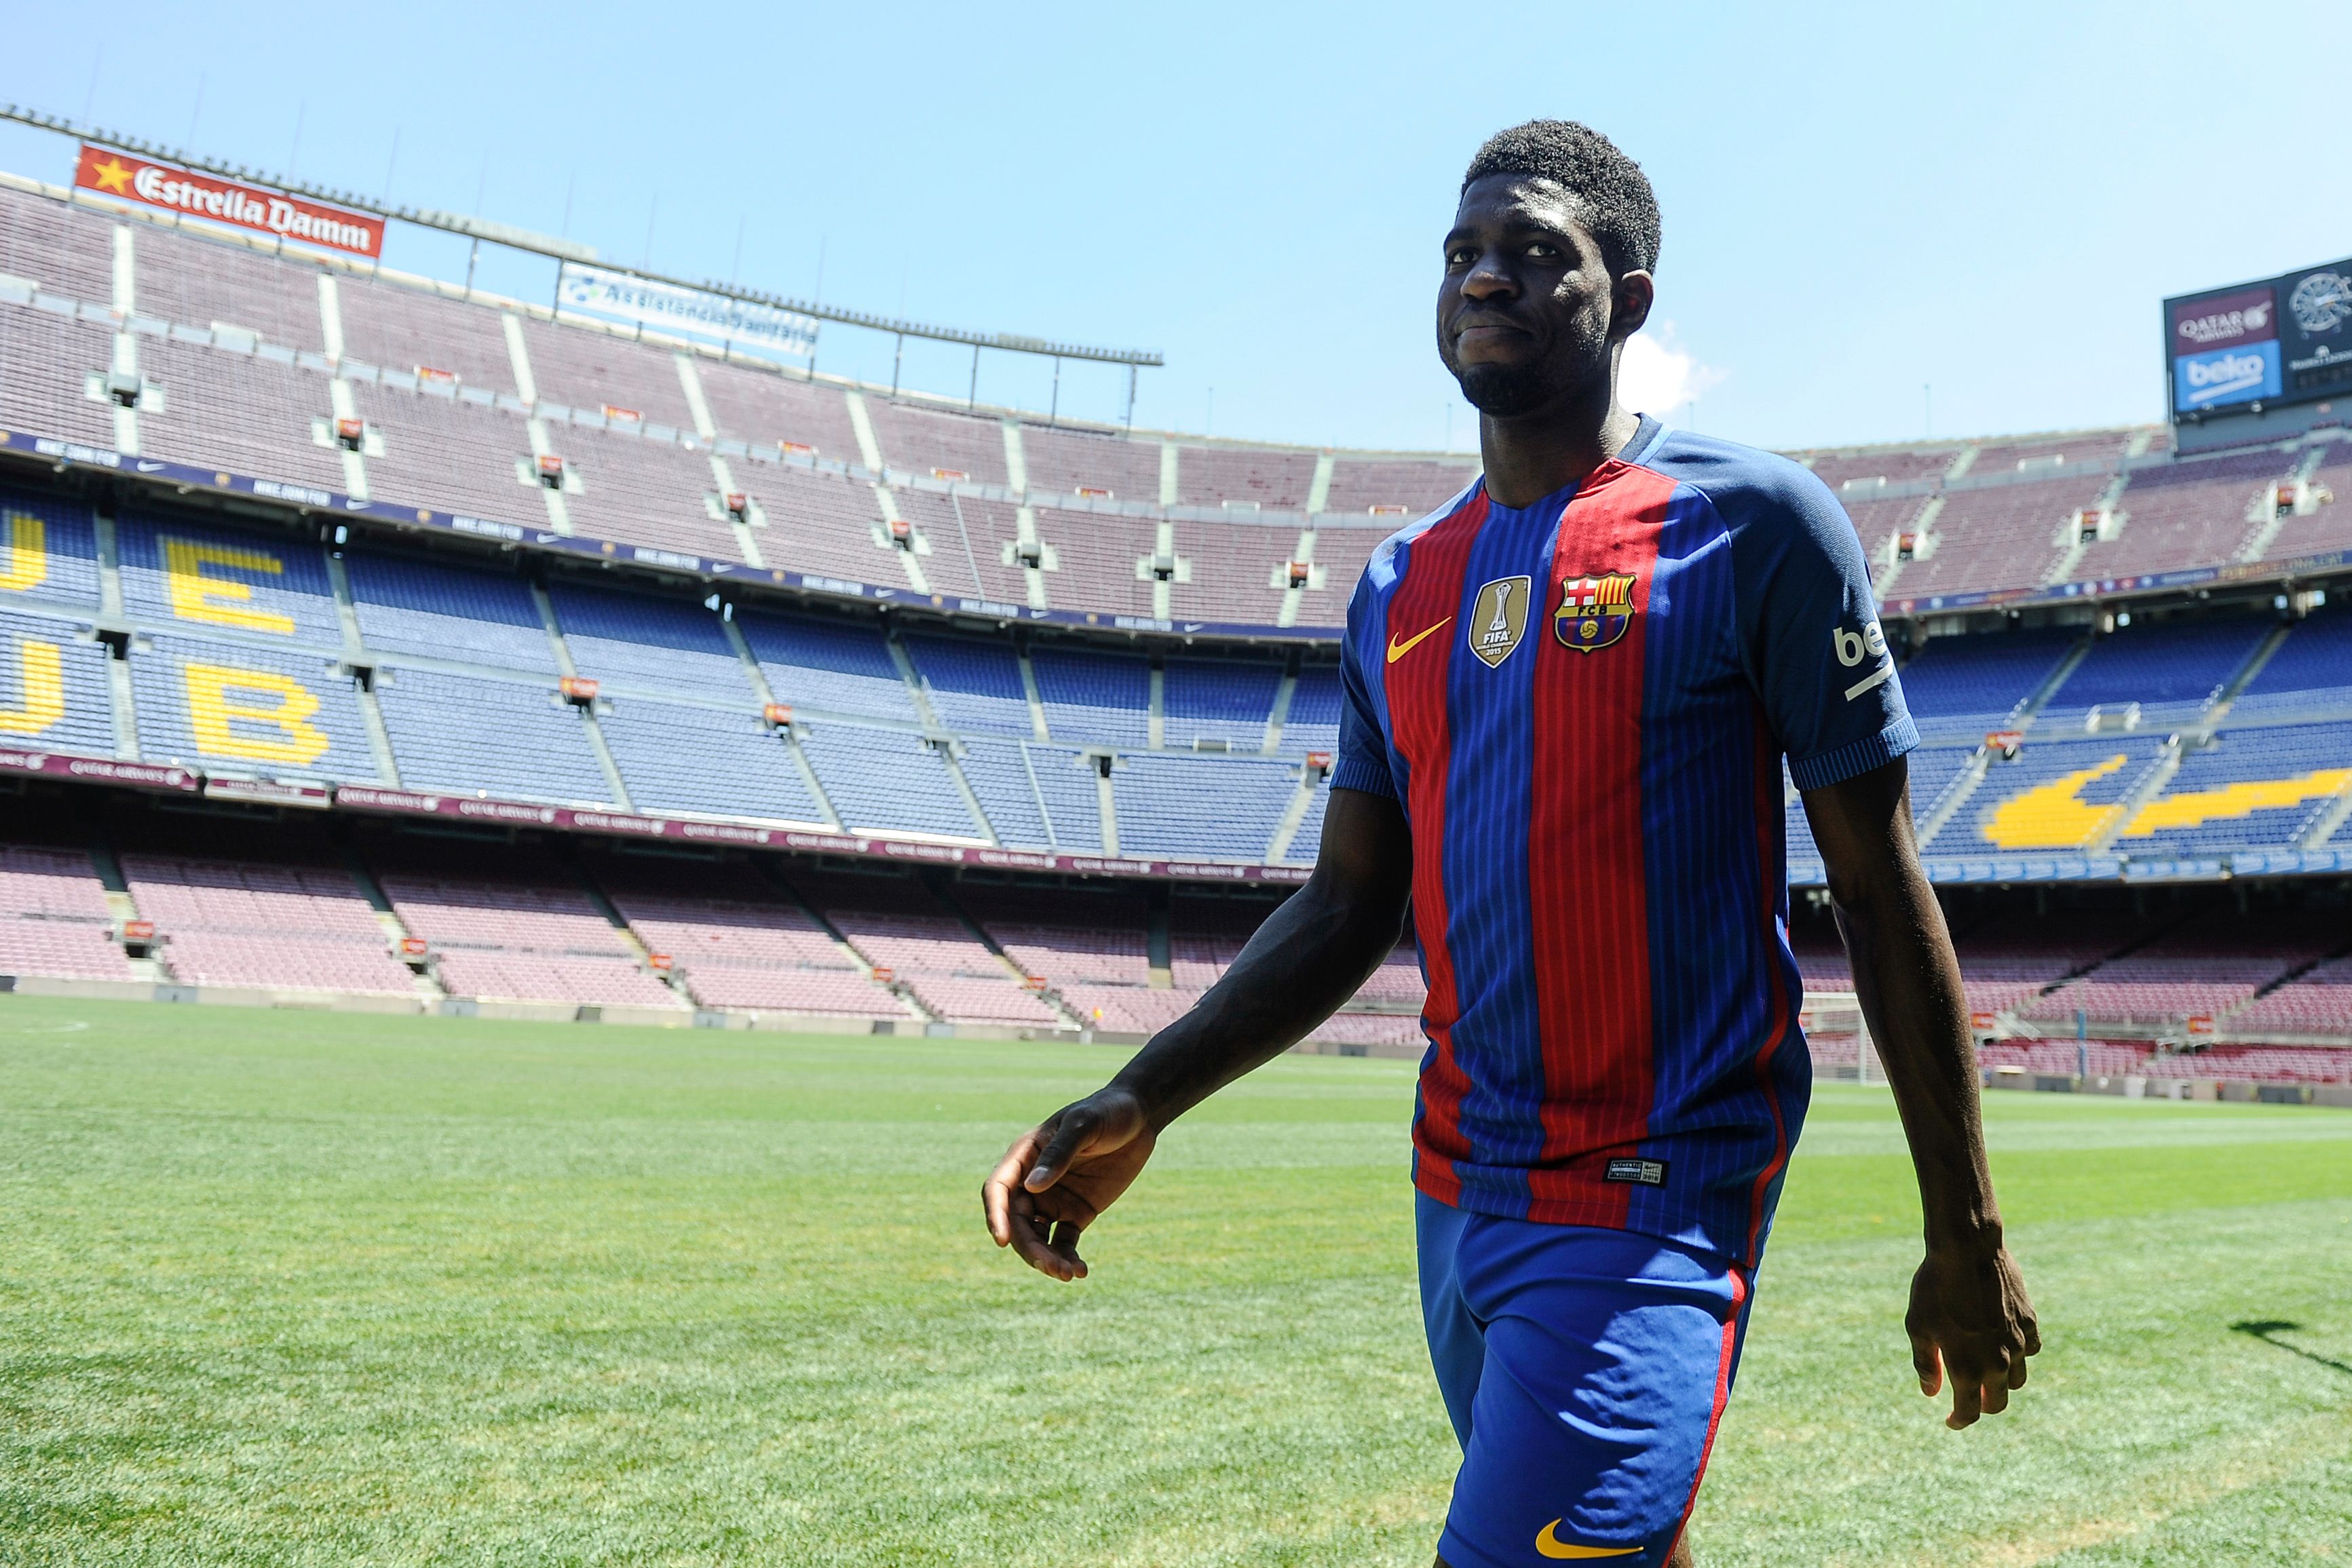 New Barcelona's French defender Samuel Umtiti smiles during his official presentation at the Camp Nou stadium in Barcelona on July 15, 2016, after signing his new contract with the Catalan club. / AFP / JOSEP LAGO        (Photo credit should read JOSEP LAGO/AFP/Getty Images)